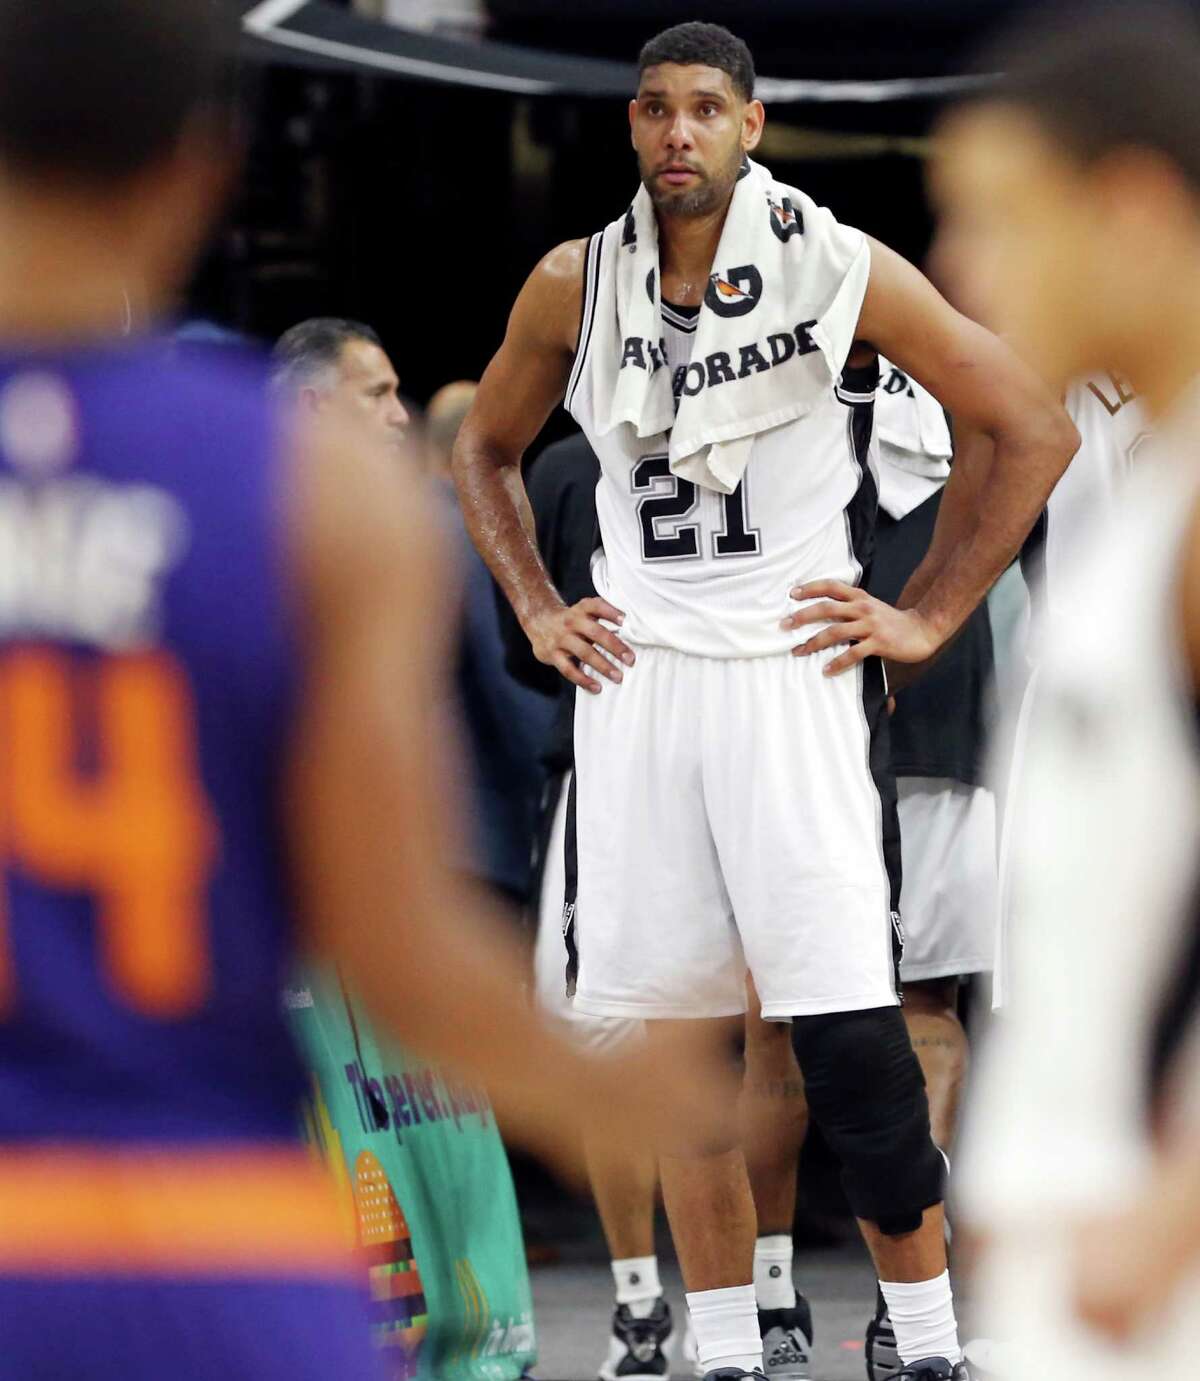 Tim Duncan Thankful for: Not being Kobe Bryant, No one yet realizing he's a Terminator Bryant was drafted the year before Duncan, and his career was generally considered the superior one through the end of the 2013 season, when a 34-year-old Bryant put up 27.3 points a night. But Bryant's body has betrayed him — he's played a total of 52 games over the last three seasons. This year he's shooting a horrifying 31.1 percent on over 16 attempts a game. He might actually have less lift in his legs than Duncan. The ageless wonder, on the other hand, ranks among the NBA's leaders in a number of categories that measure efficiency and production. He is a cyborg. 